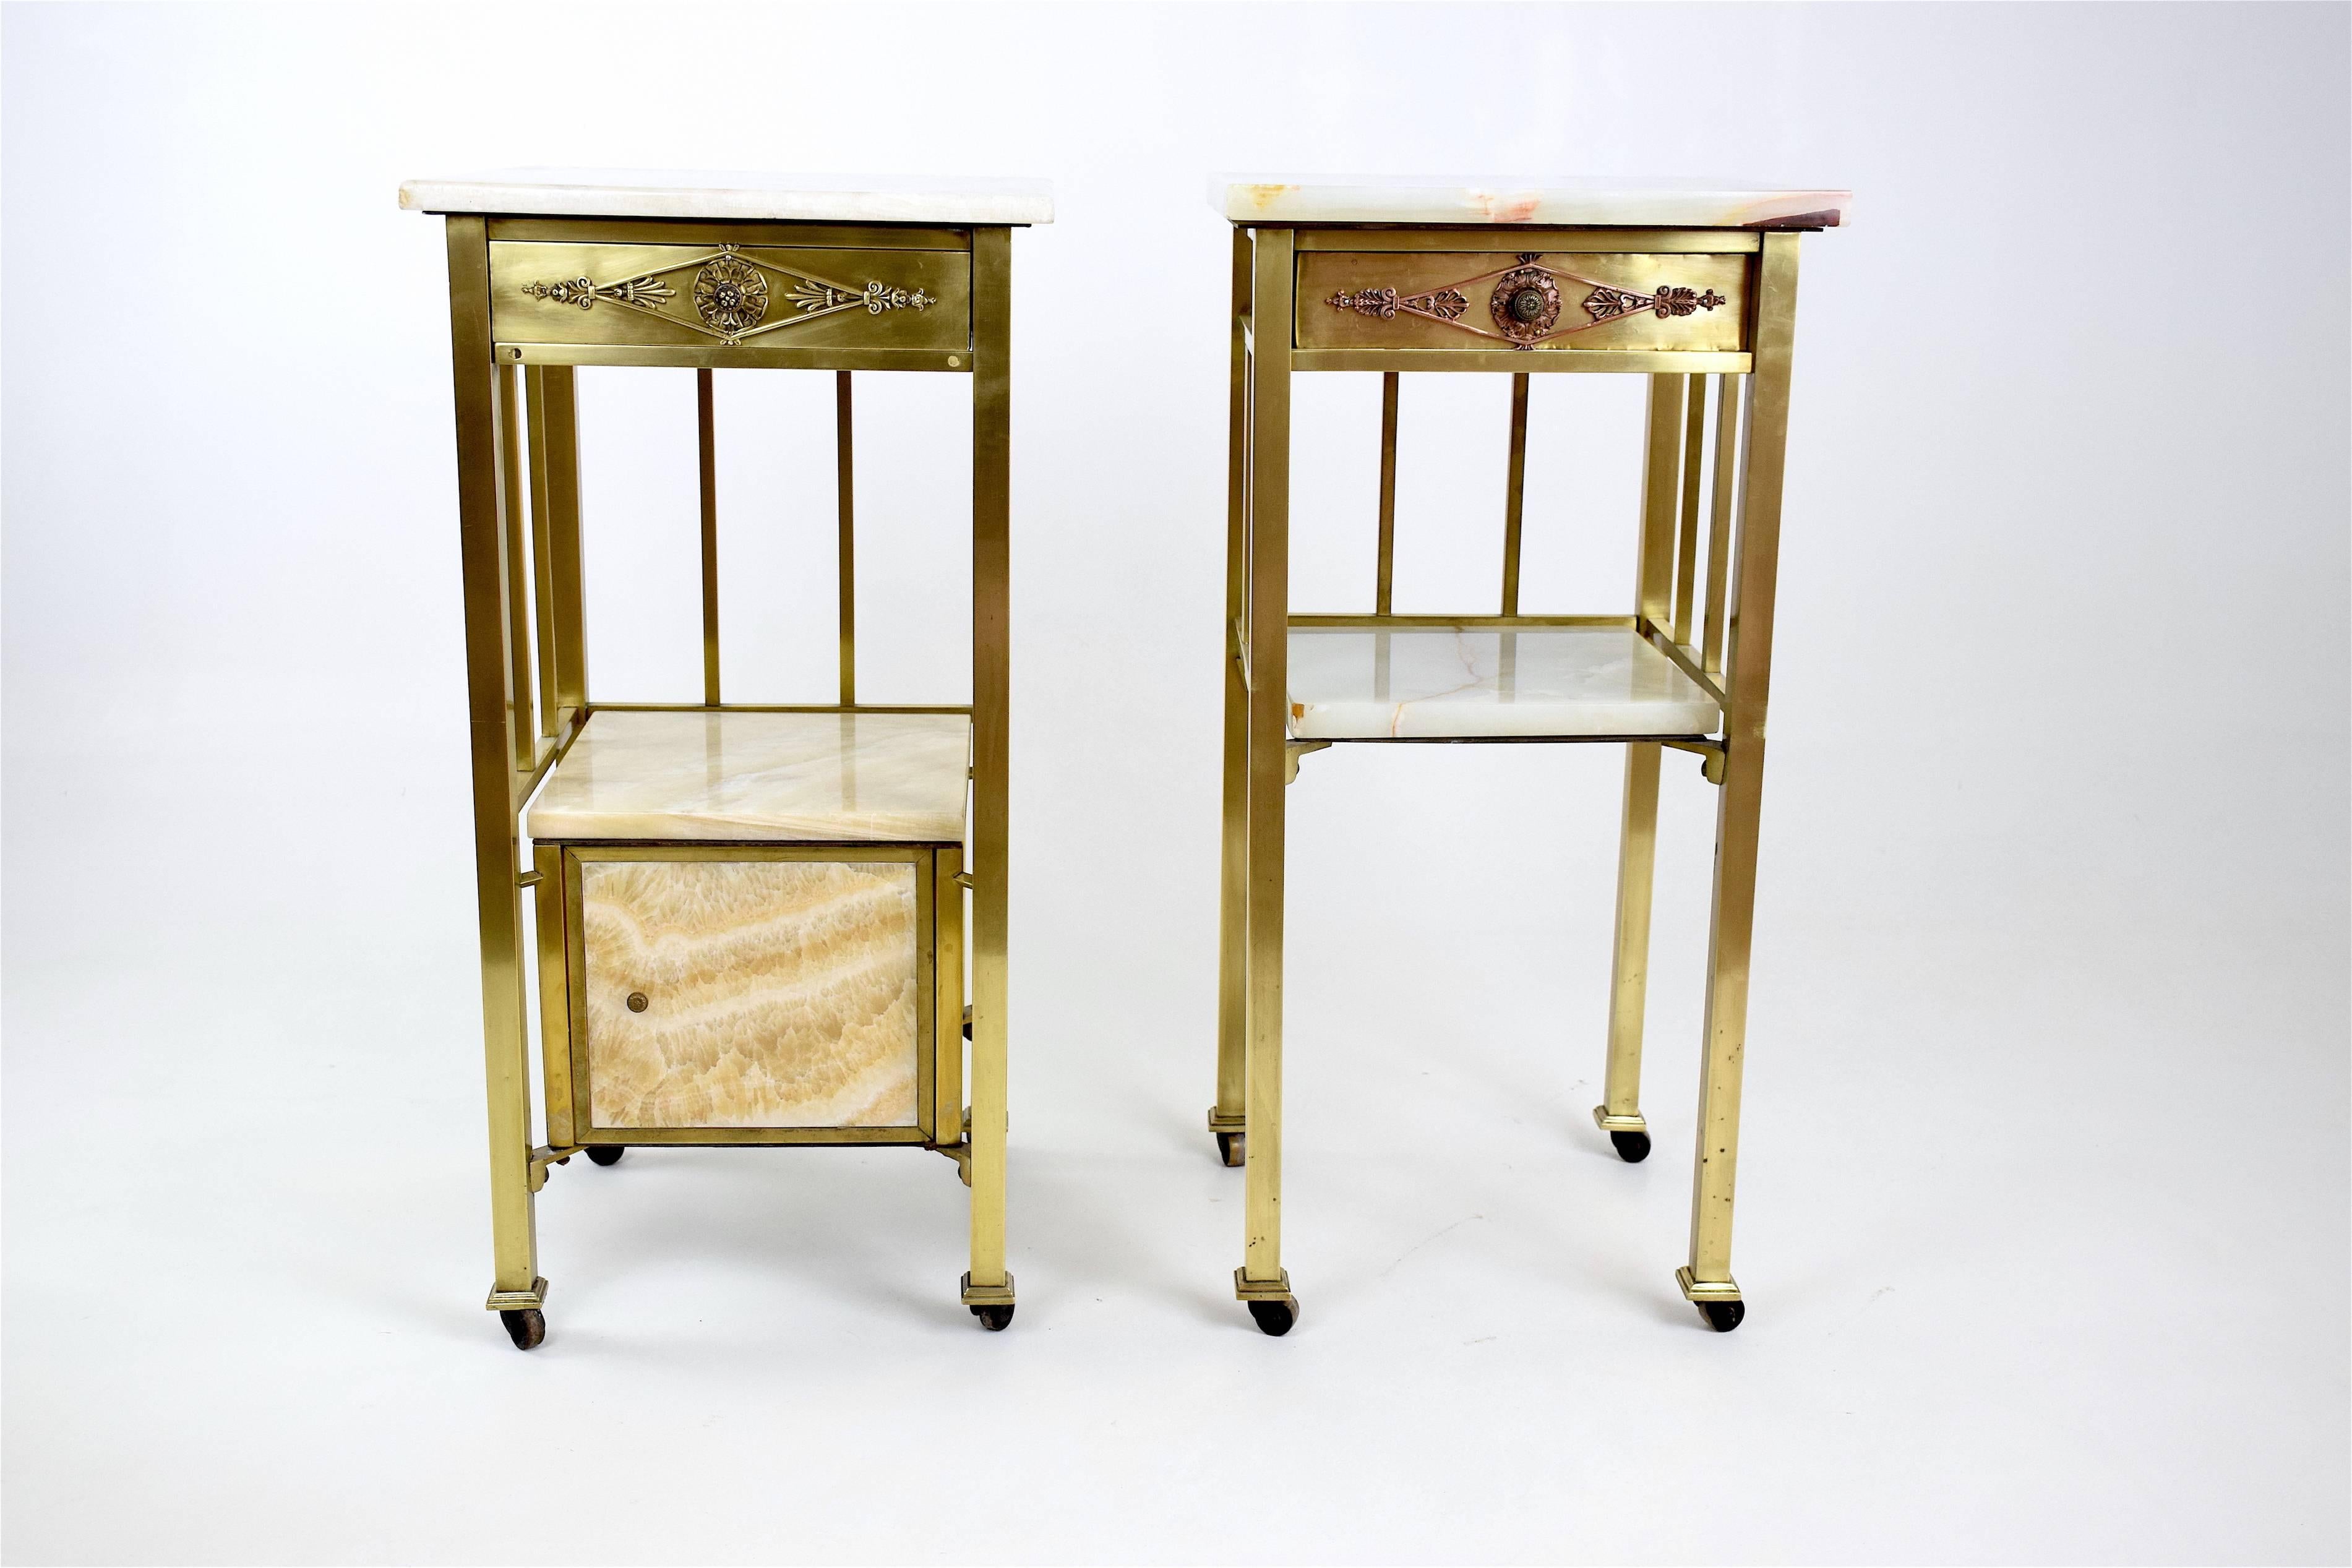 20th Century pair of high French two-tier nightstands or side tables with rollers, marble tops, brass and wooden shelves adorned with floral details in brass or copper. 

One of the pieces is composed of a  lower cabinet and has been previously